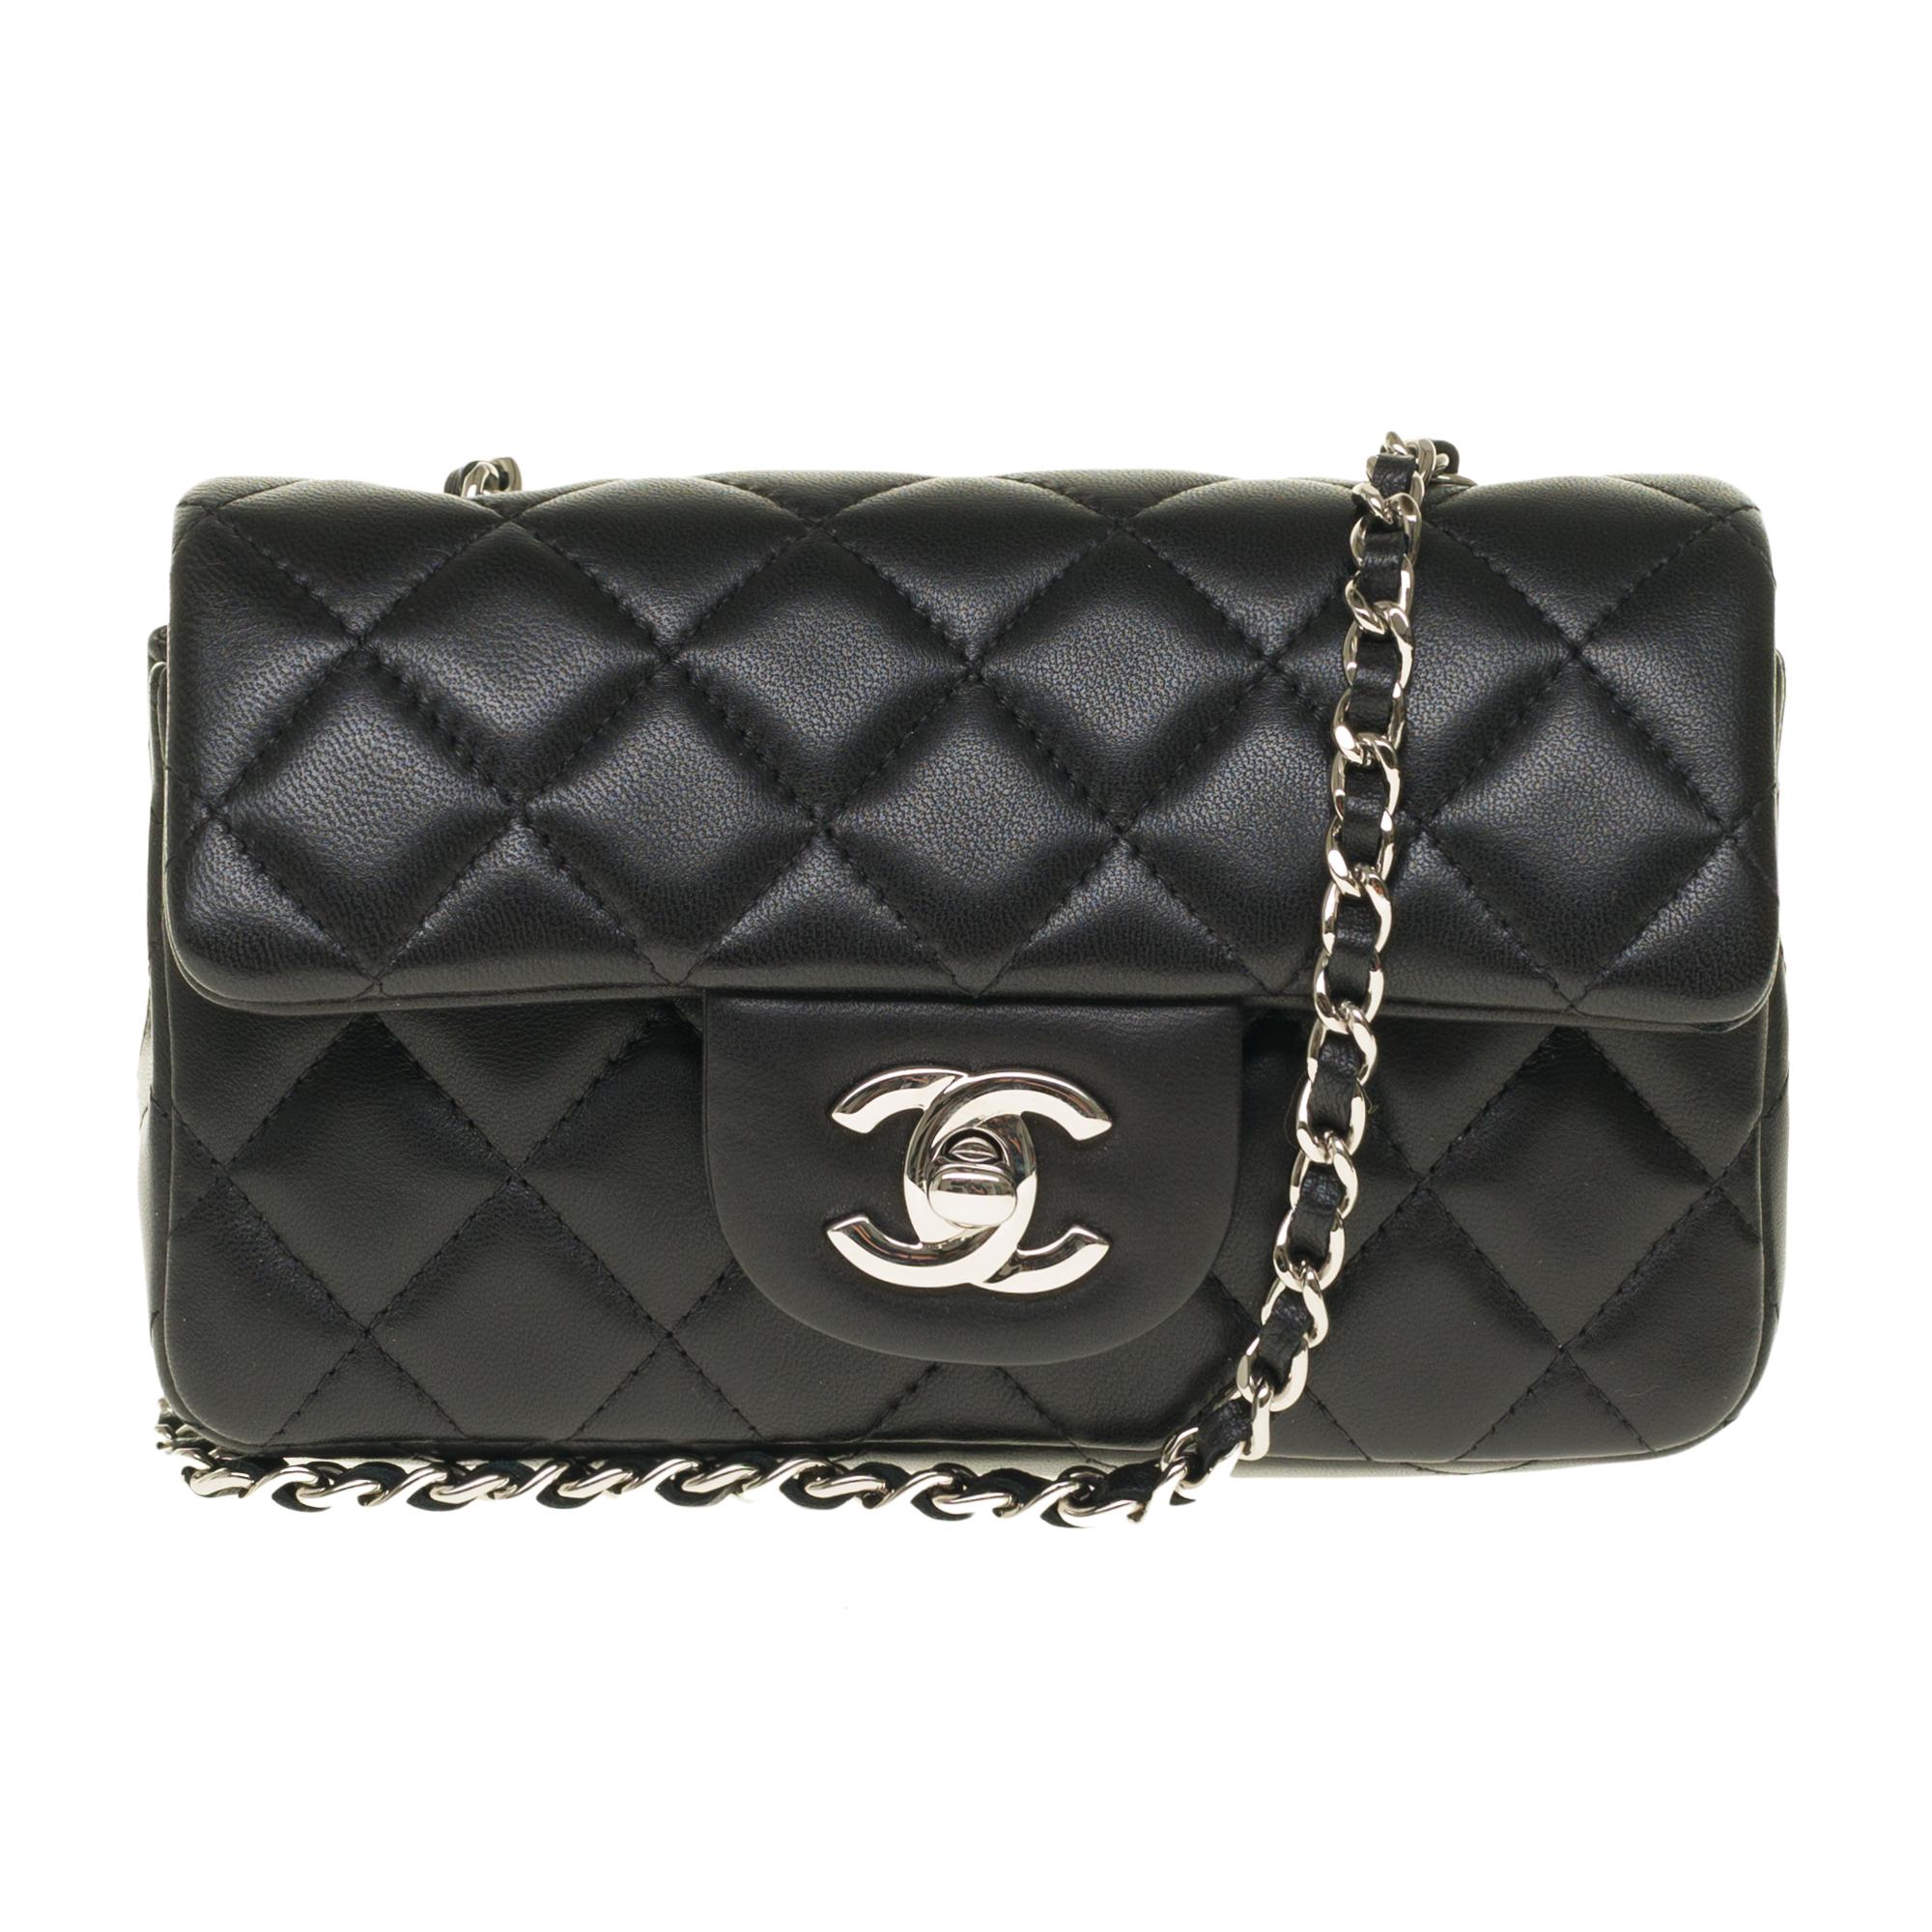 Splendid Handbag Mini Chanel Timeless in black nappa leather, chain handle intertwined with black leather allowing a hand or shoulder or shoulder strap.

Silver metal flap closure.
Lining in black leather, one patch pocket.
Signature: 